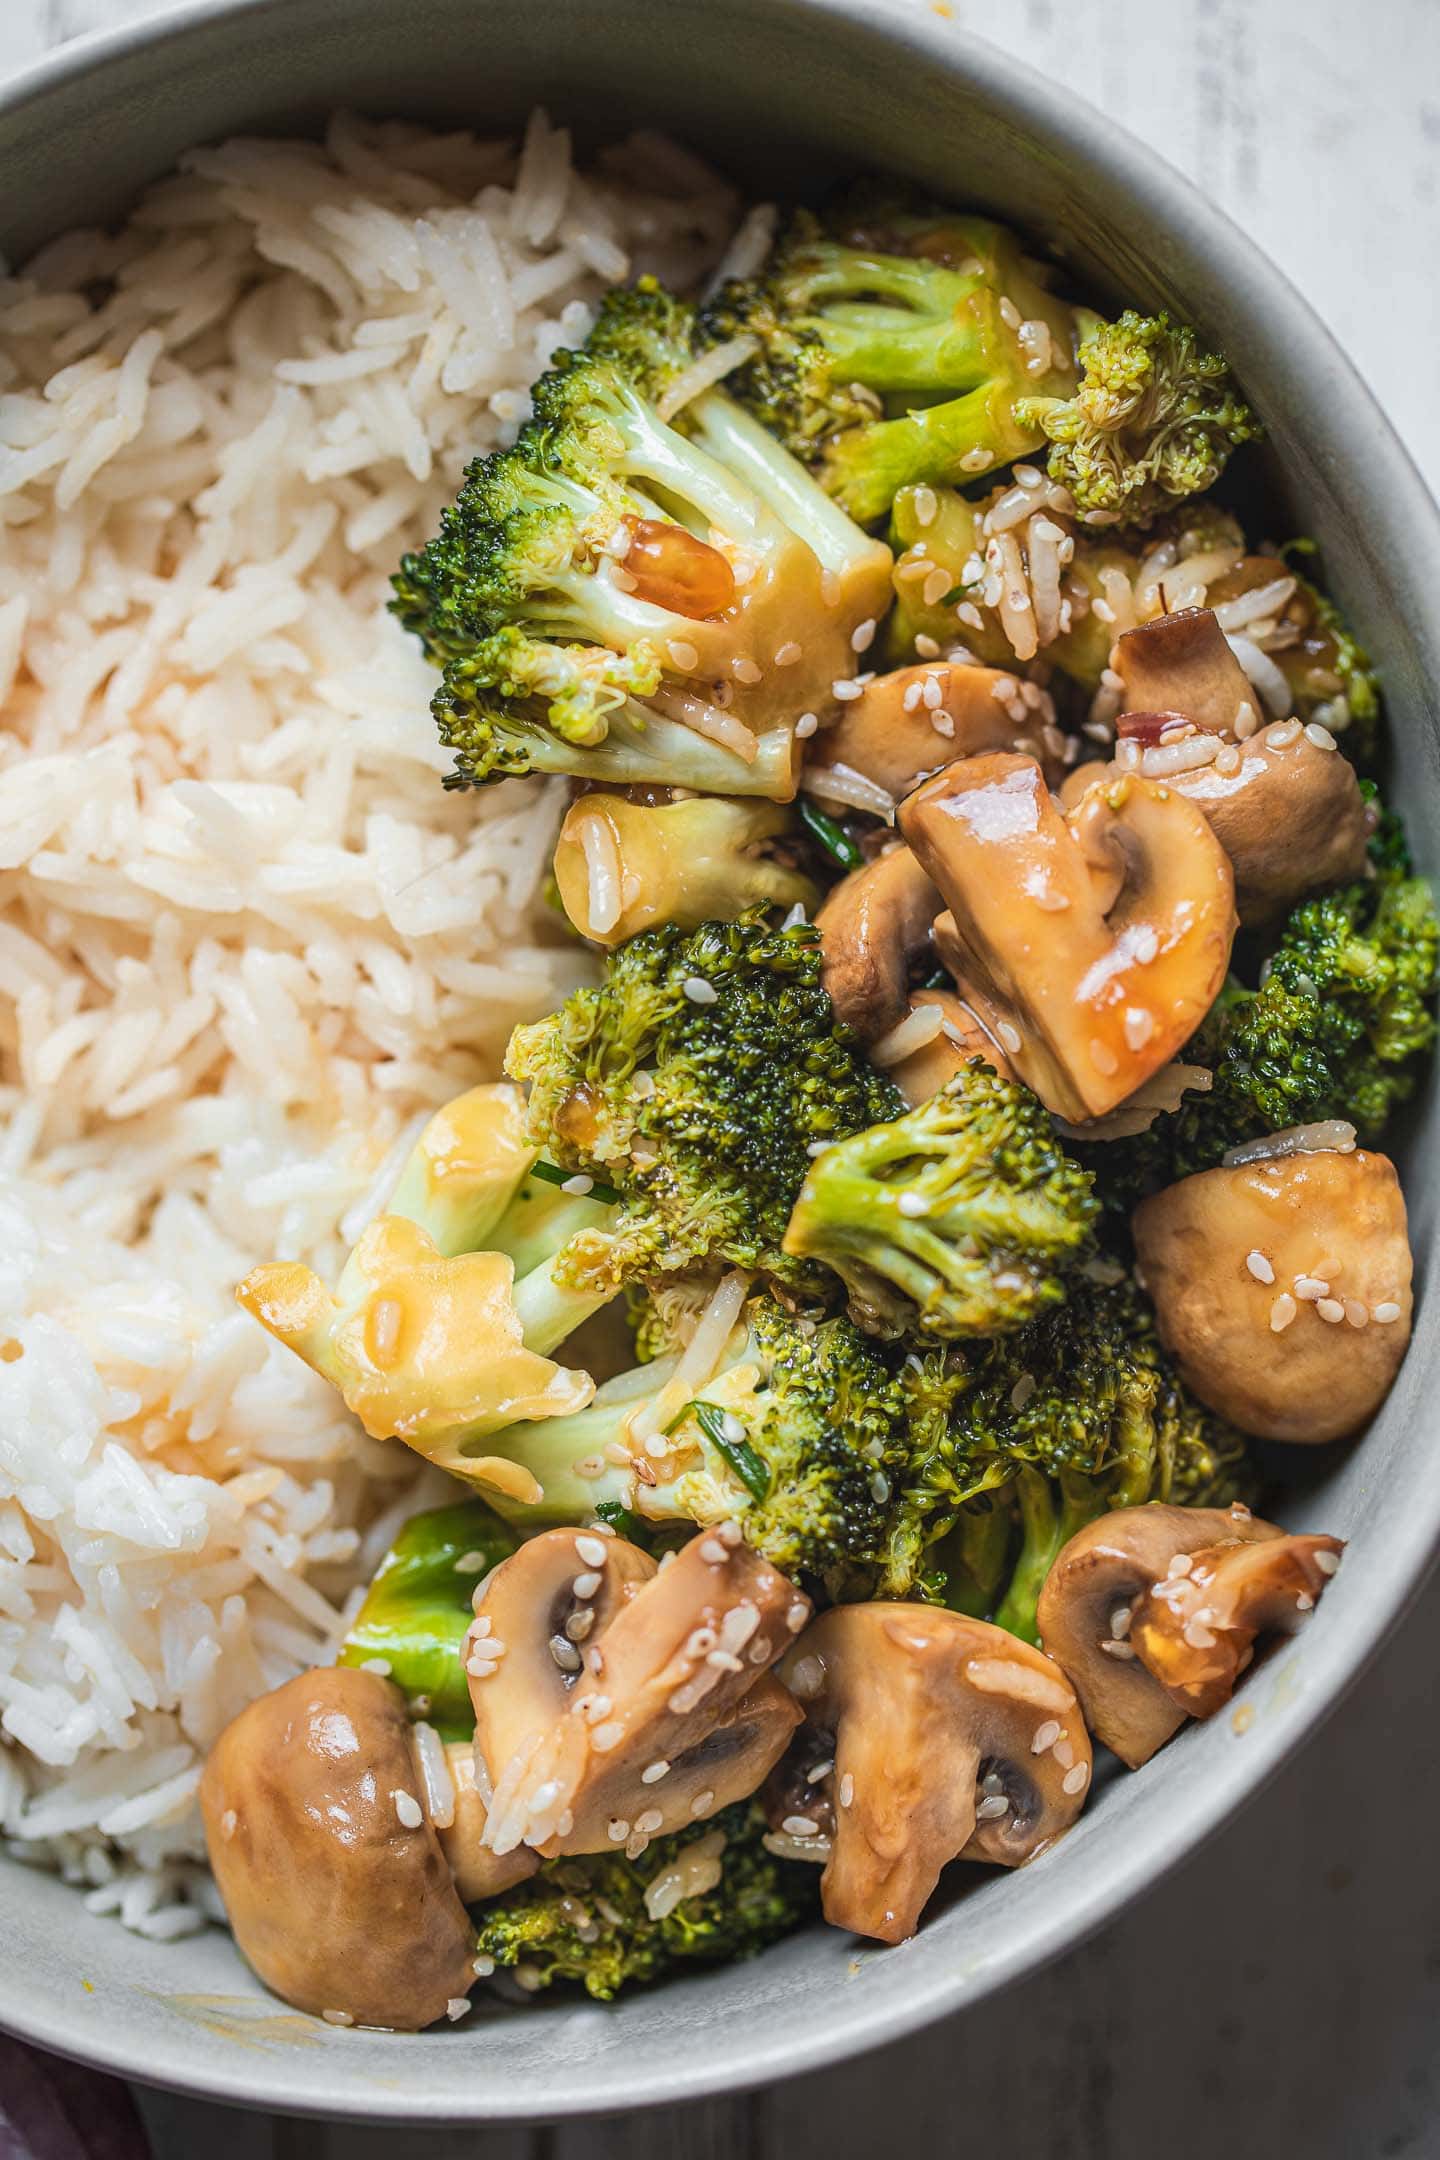 Closeup of a vegetable stir-fry with broccoli and mushrooms